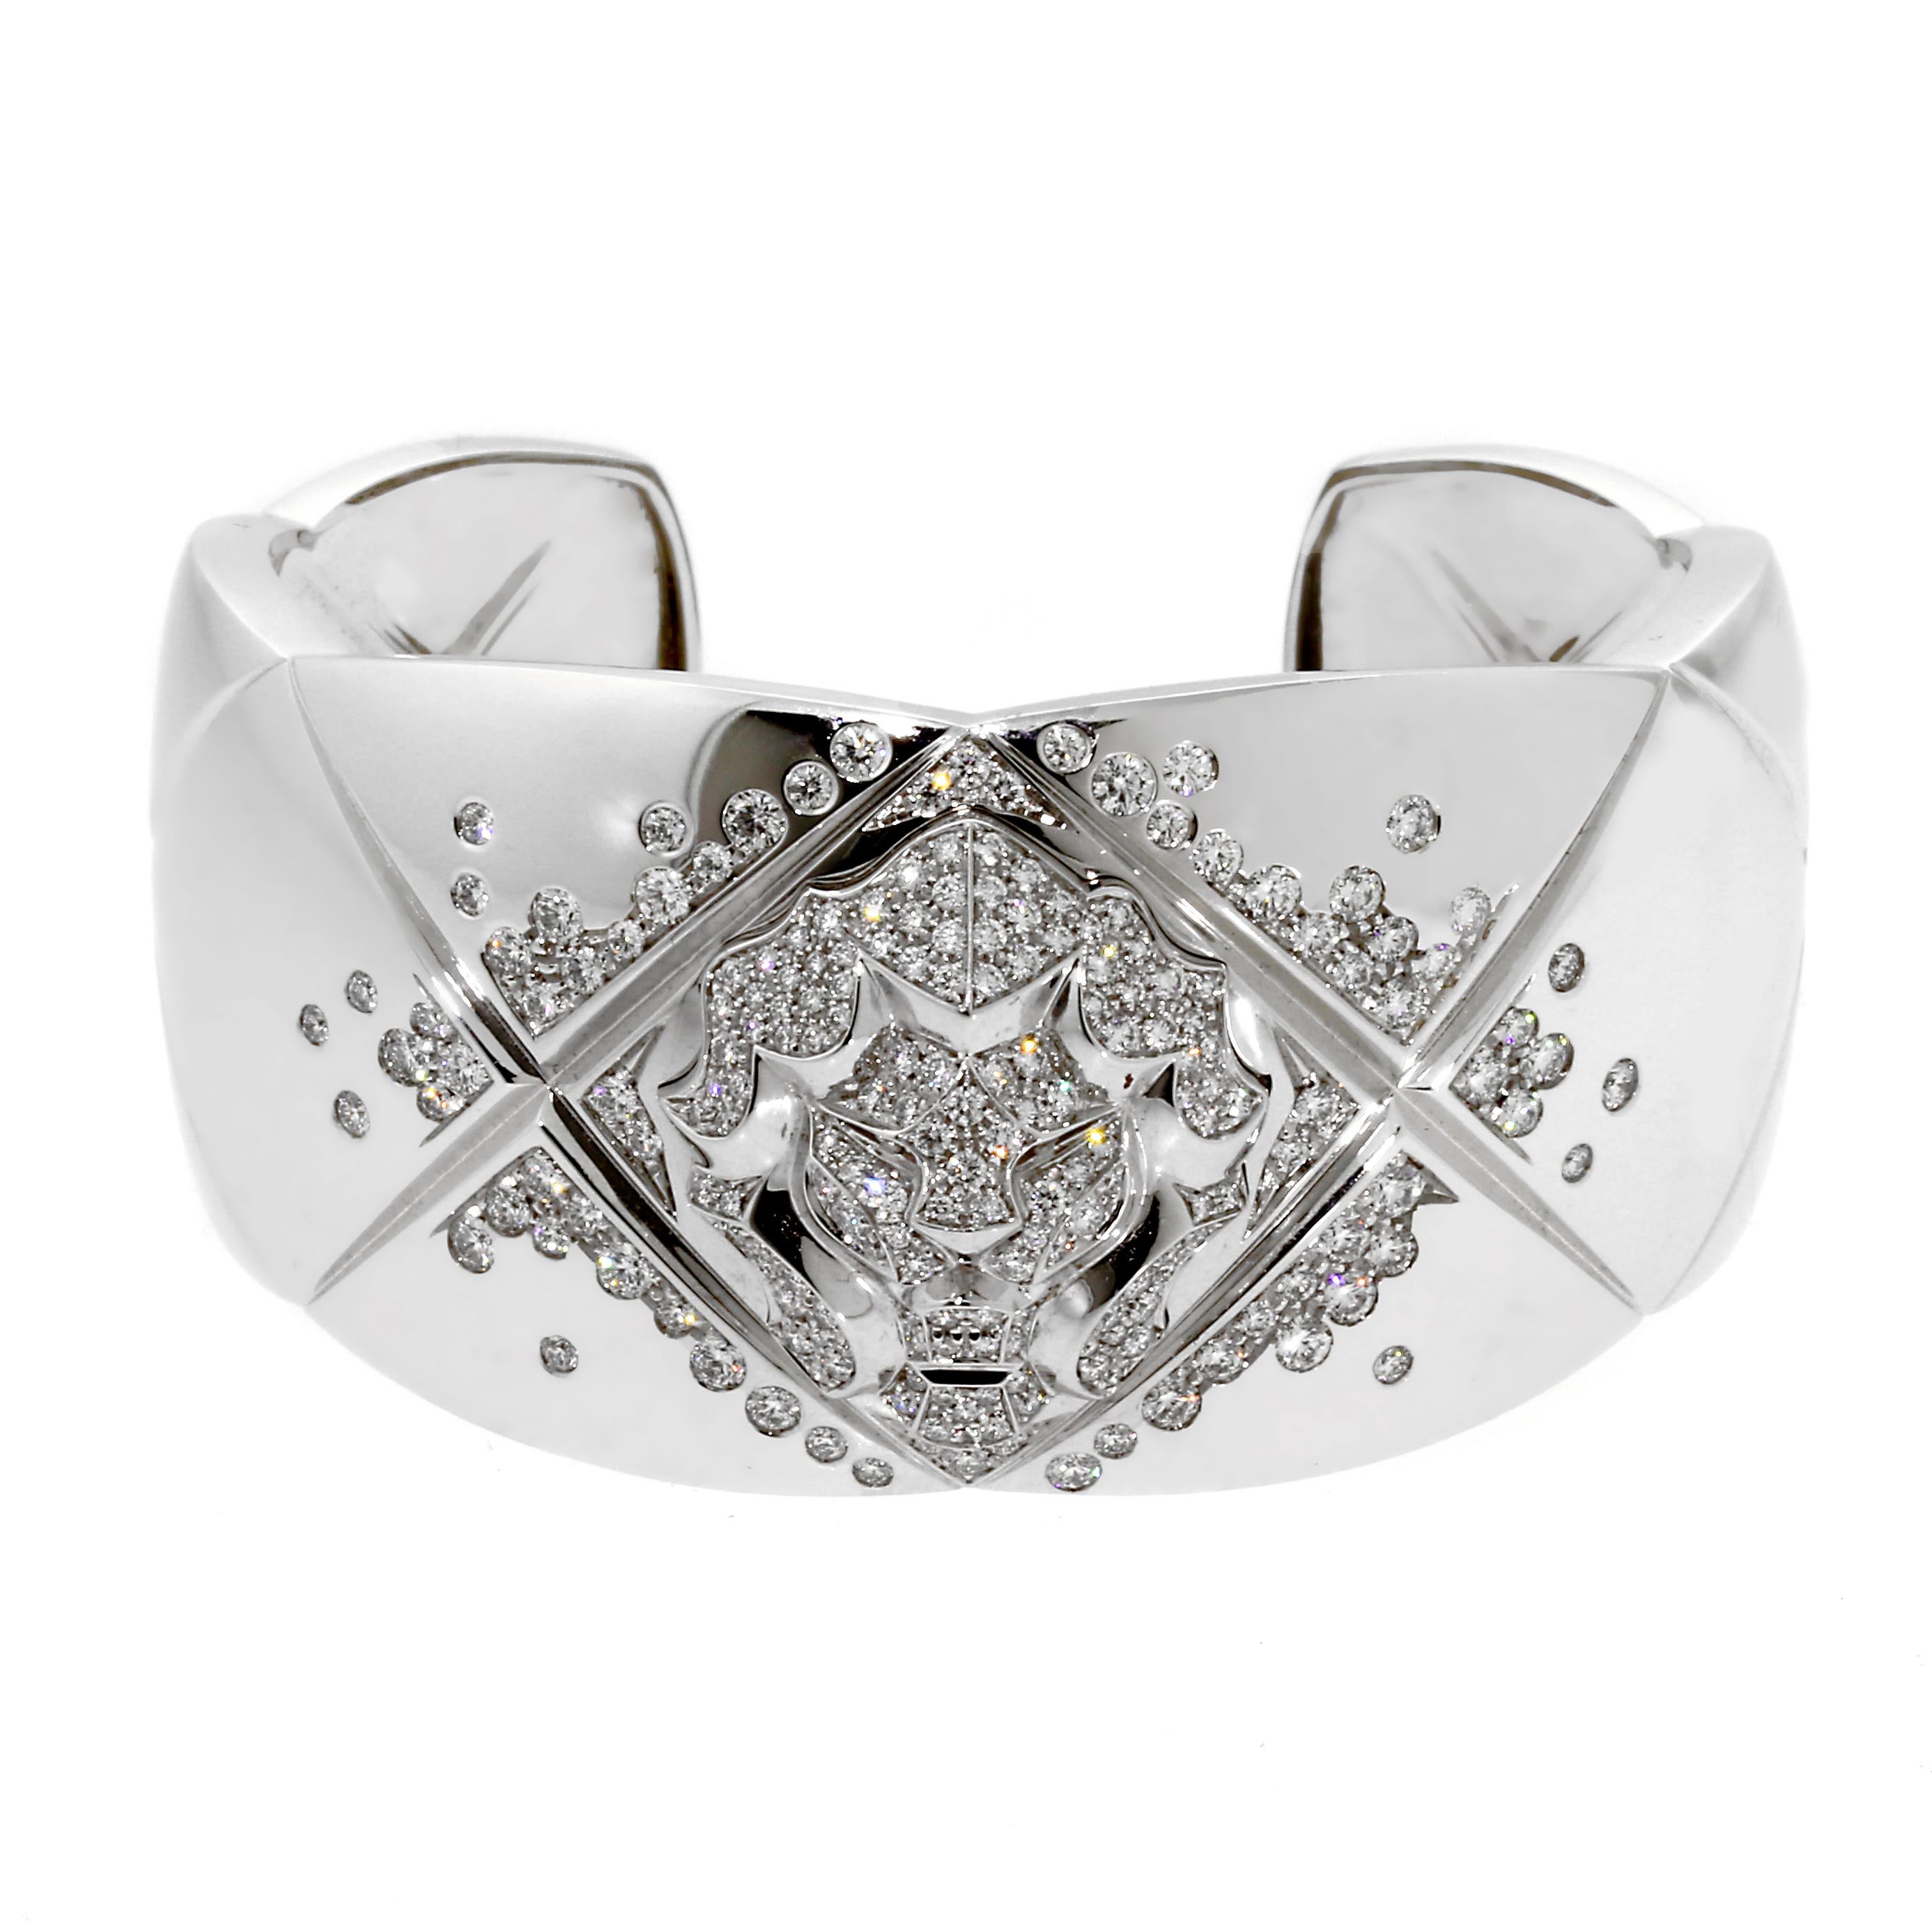 A magnificent authentic Chanel Coco Crush diamond cuff bracelet featuring 204 of the finest round brilliant cut Chanel diamonds set in shimmering 18k white gold. Size XS

Chanel Retail Price: $31,200 + Tax